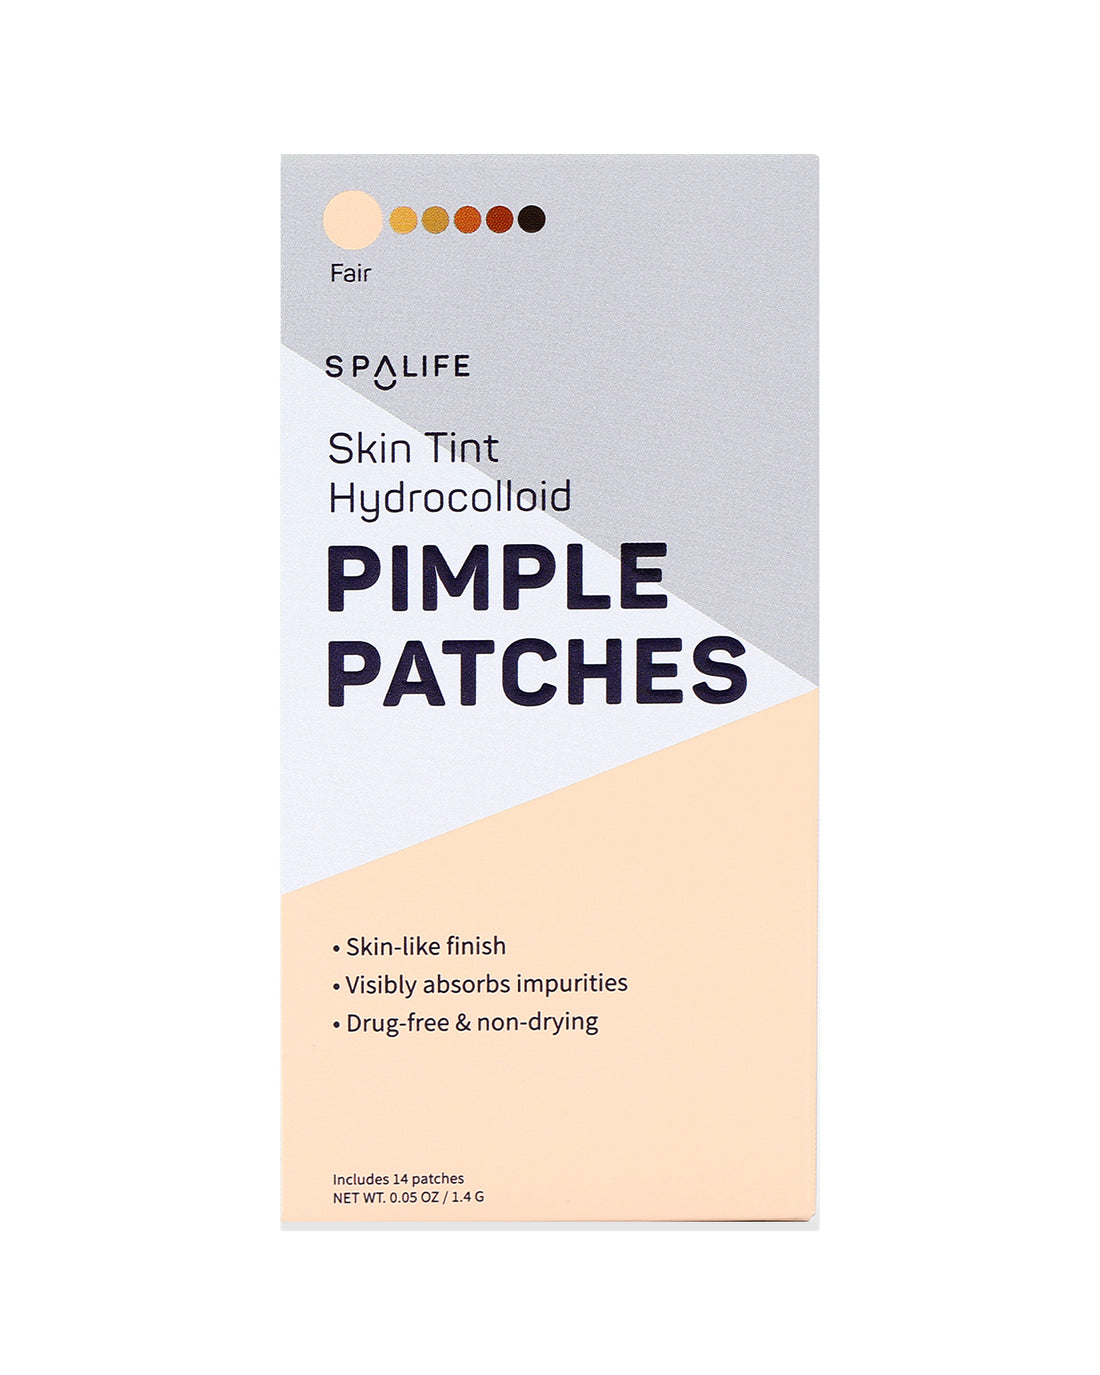 Skin_tint_pimple_patches_packe-189